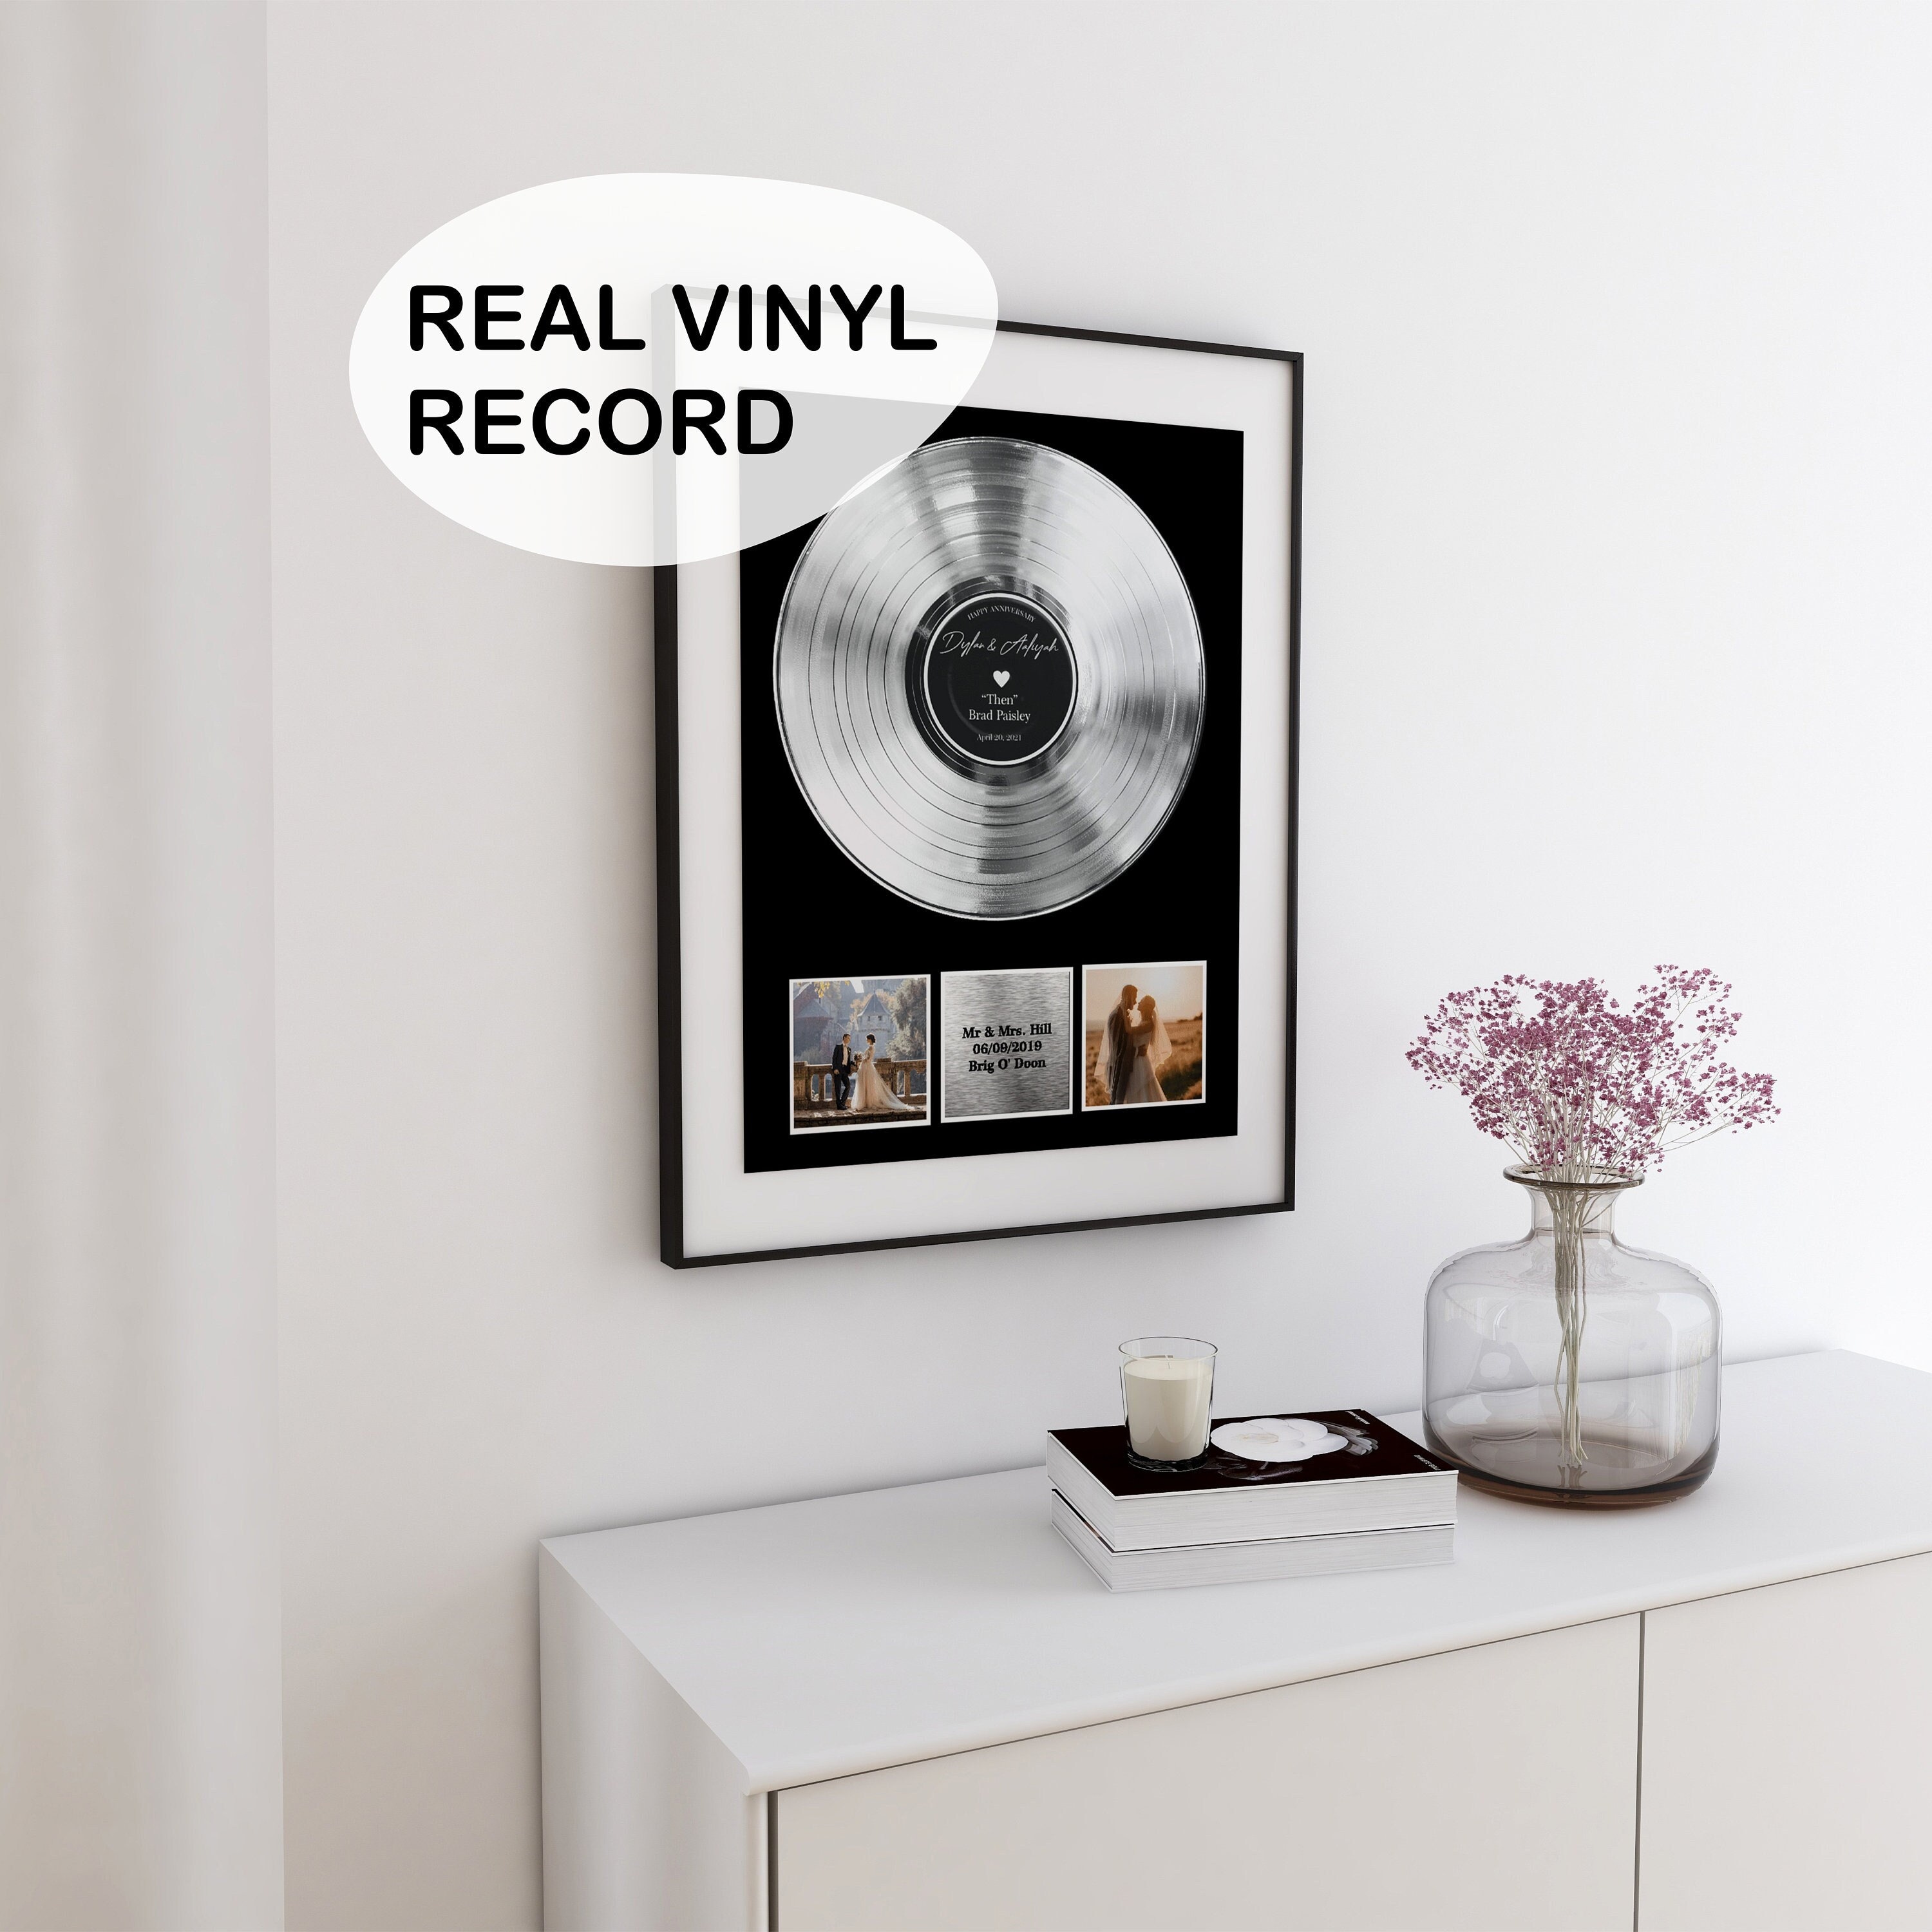 Creative Picture Frames 16 x 24 Jukebox Record Frame and Double Black-Black Matting Displays Album Cover with 33 Vinyl LP